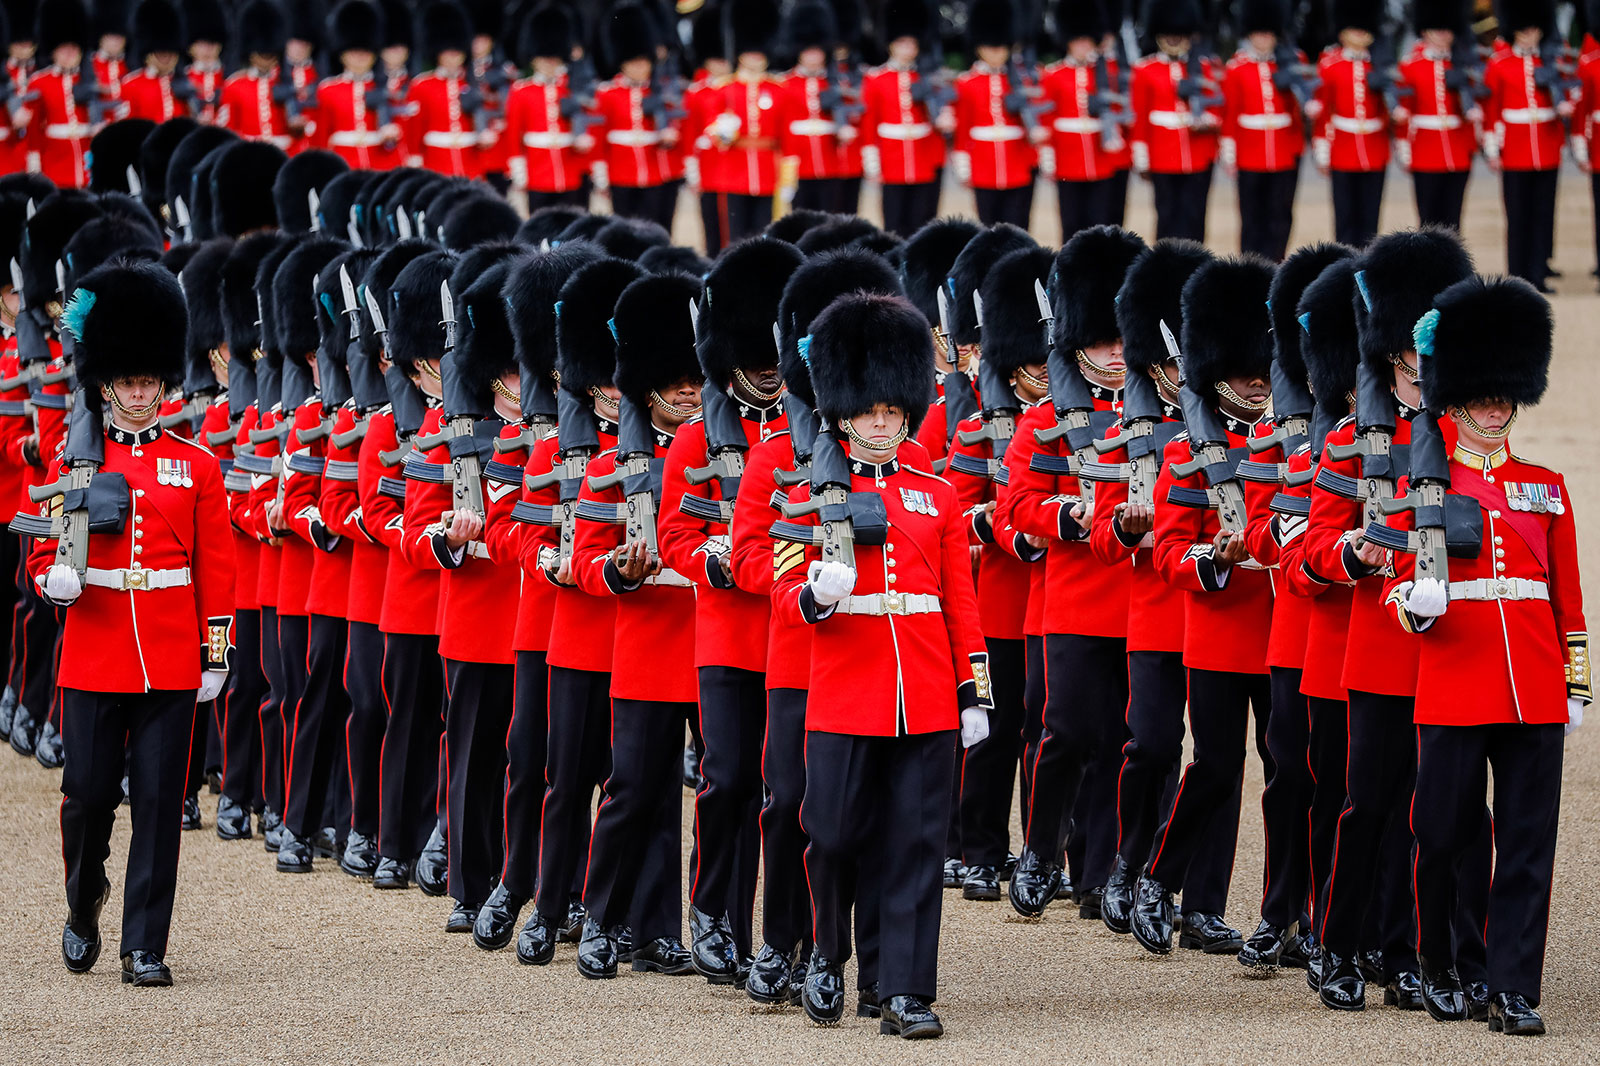 Soldiers on parade during The Colonel's Review at Horse Guards Parade on May 28 in London. The Colonel's Review is the final evaluation of the Trooping the Colour parade before the event which will take place on Thursday, June 2, in celebration of Queen Elizabeth II's Platinum Jubilee. 